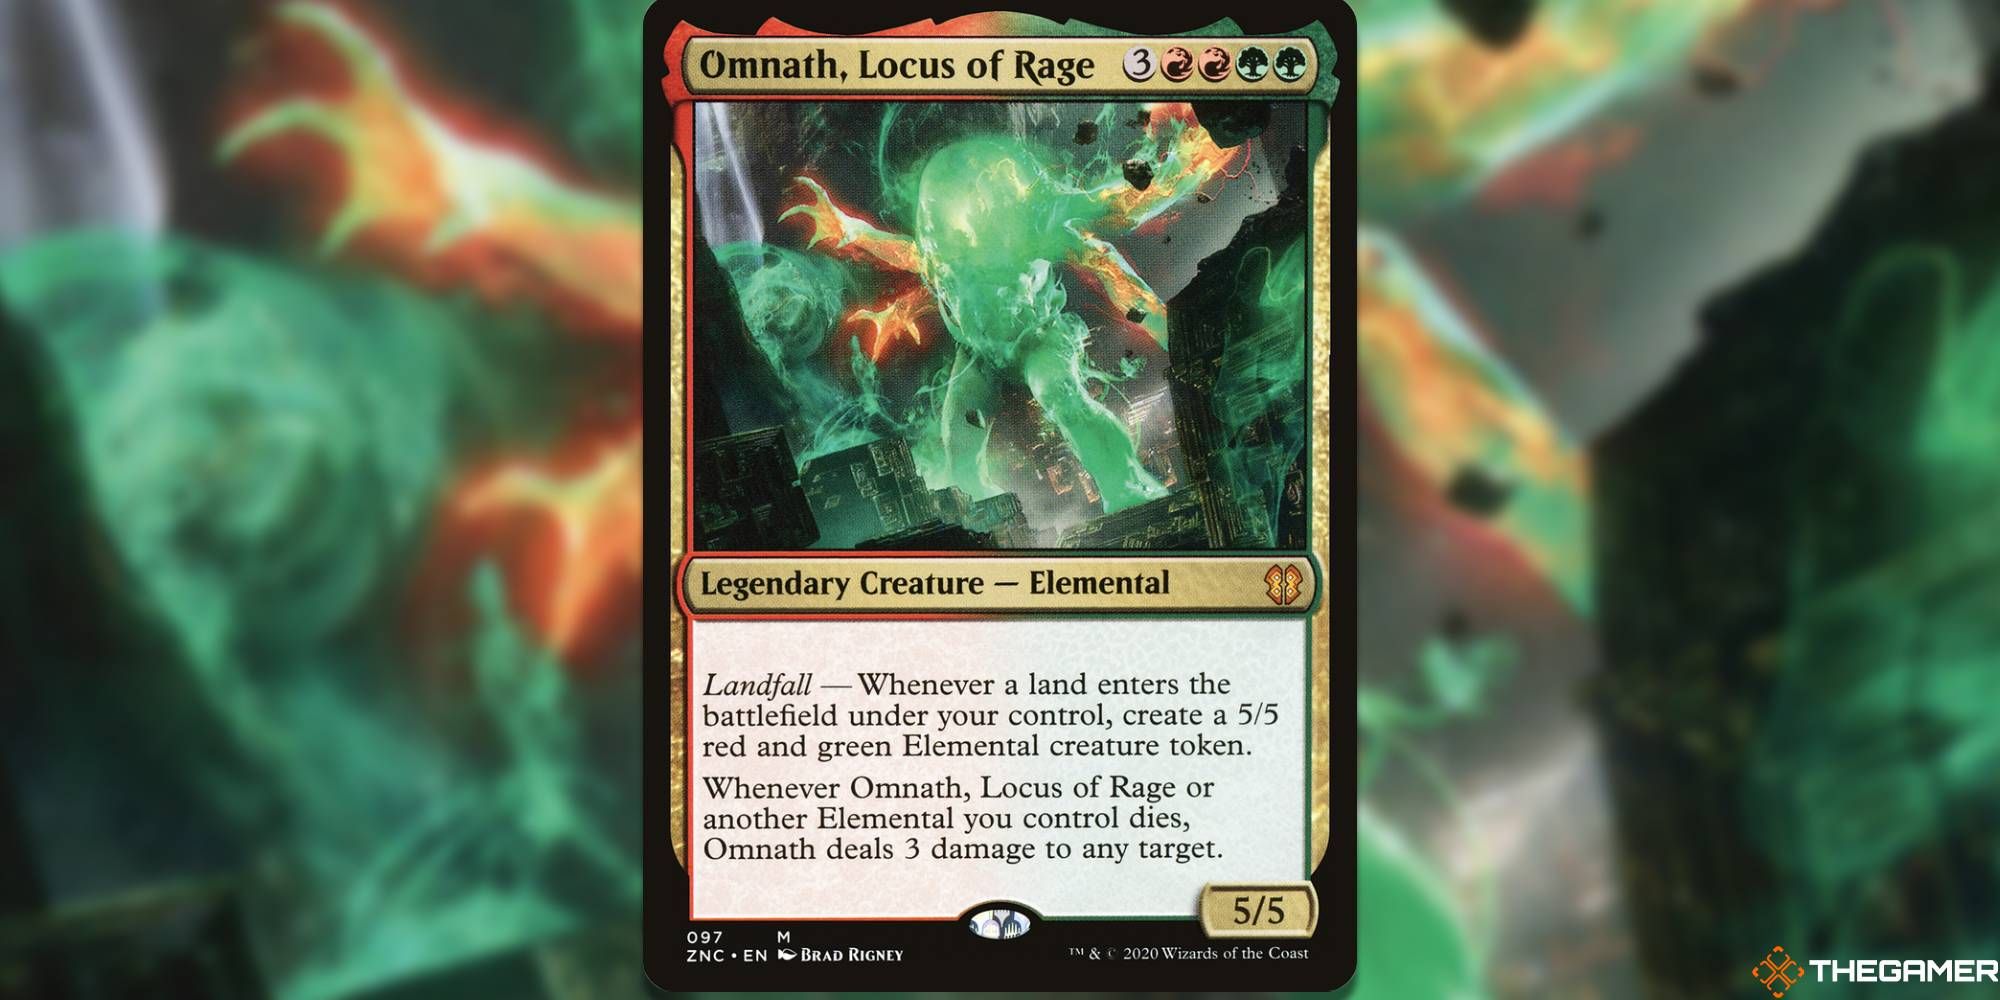 Image of the Omnath, Locus of Rage card from Magic: The Gathering with art by Brad Rigney